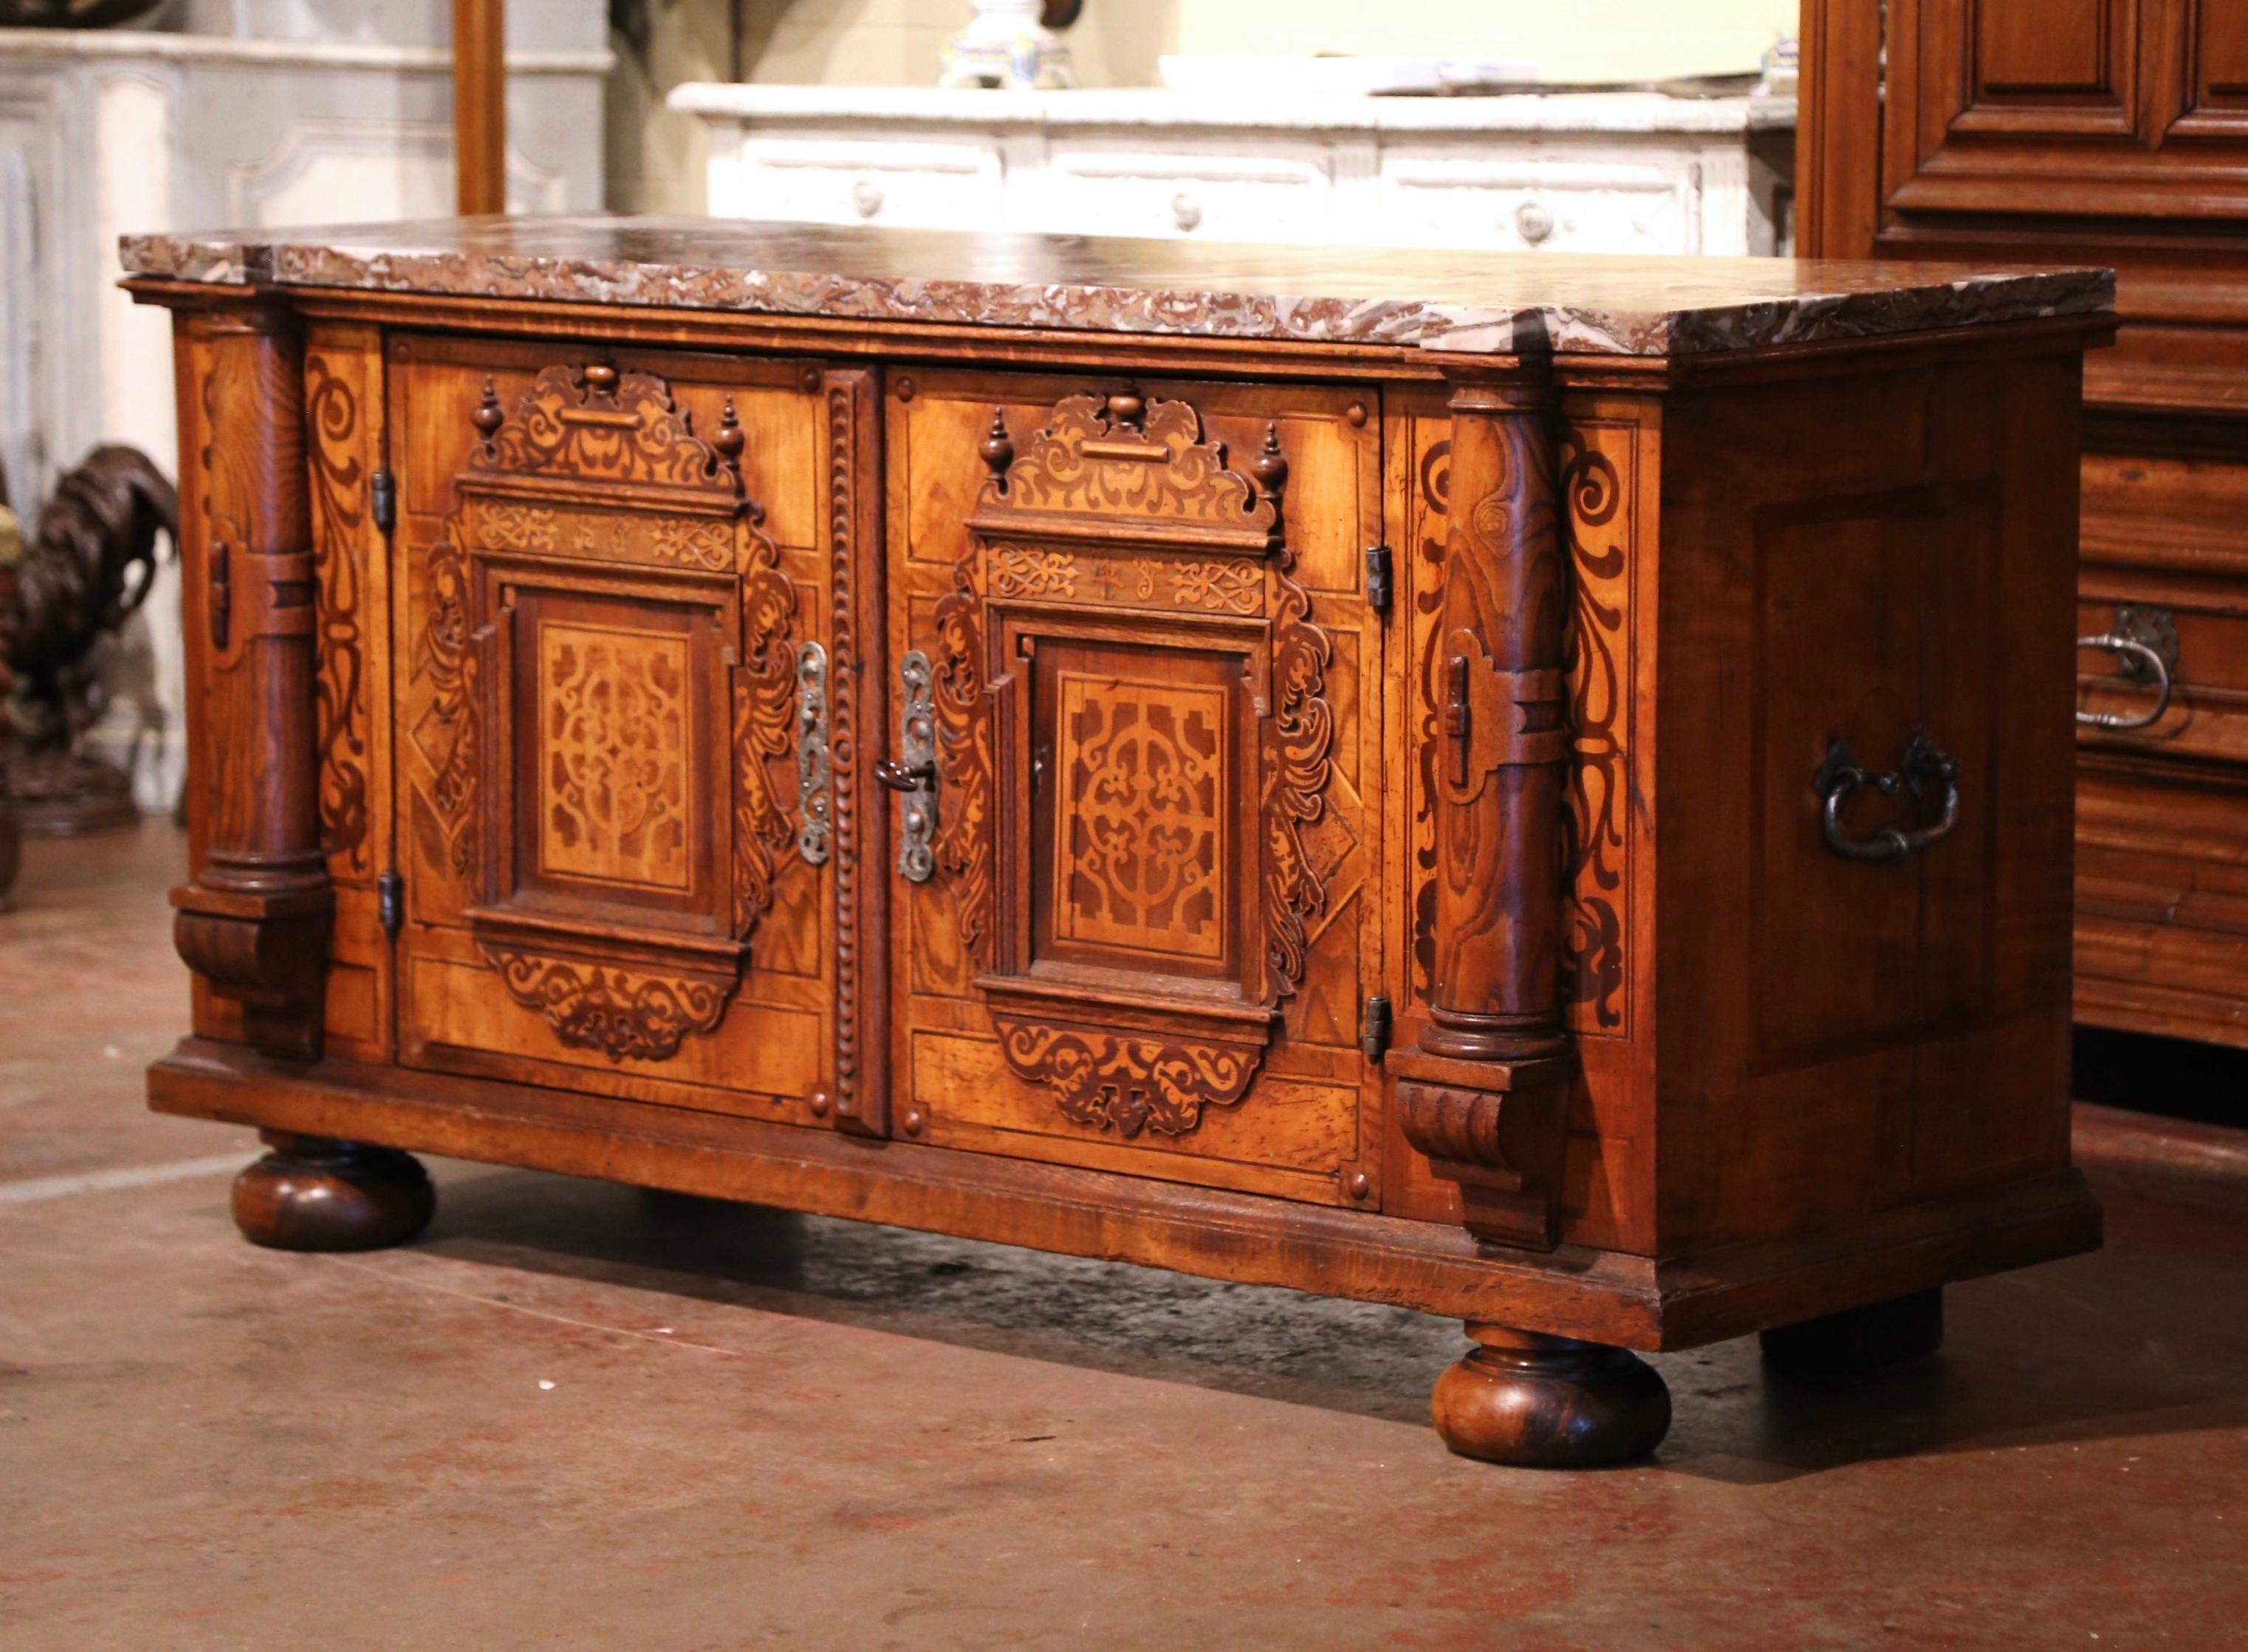 Decorate a dining room or an office with this heavily carved enfilade. Crafted in Switzerland circa 1780, the cabinet stands on bun feet over two intricate doors opening to inside shelving. Both doors flanked with thick side columns in high relief,